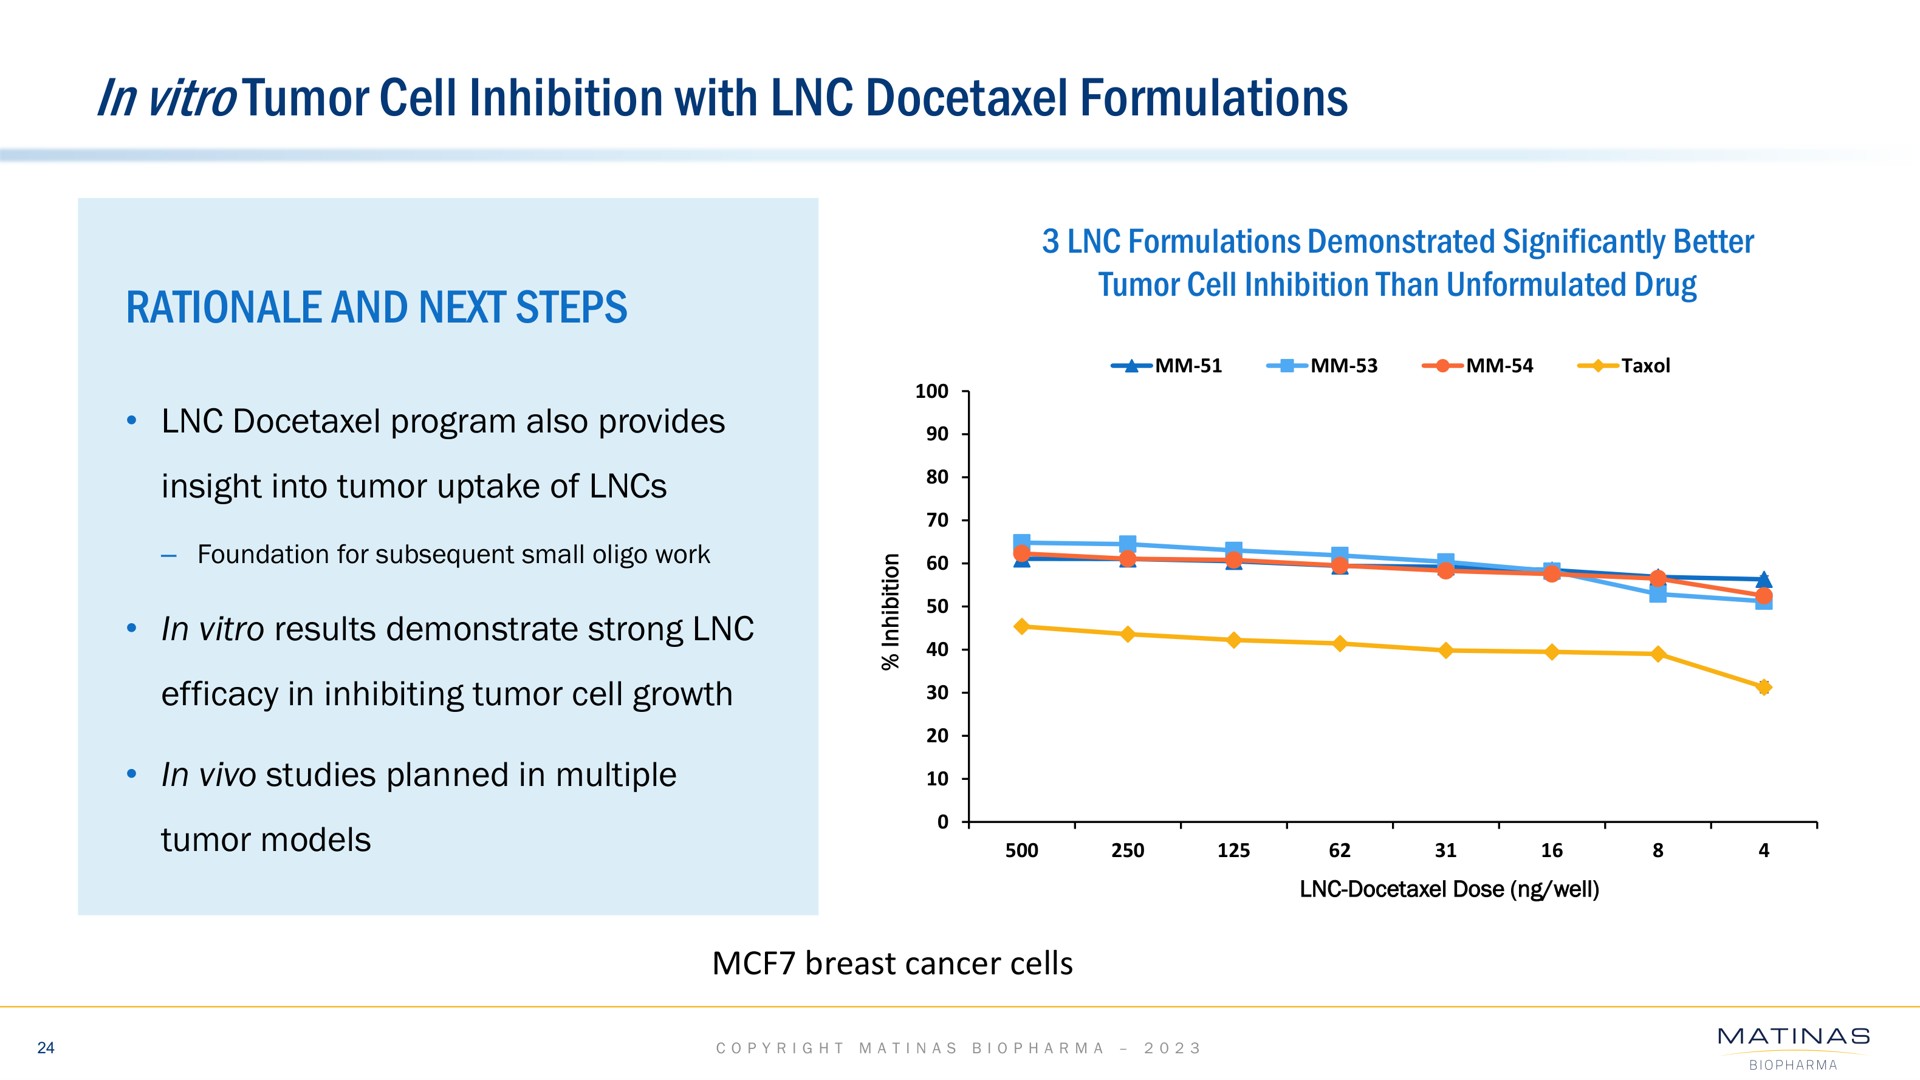 in tumor cell inhibition with formulations | Matinas BioPharma